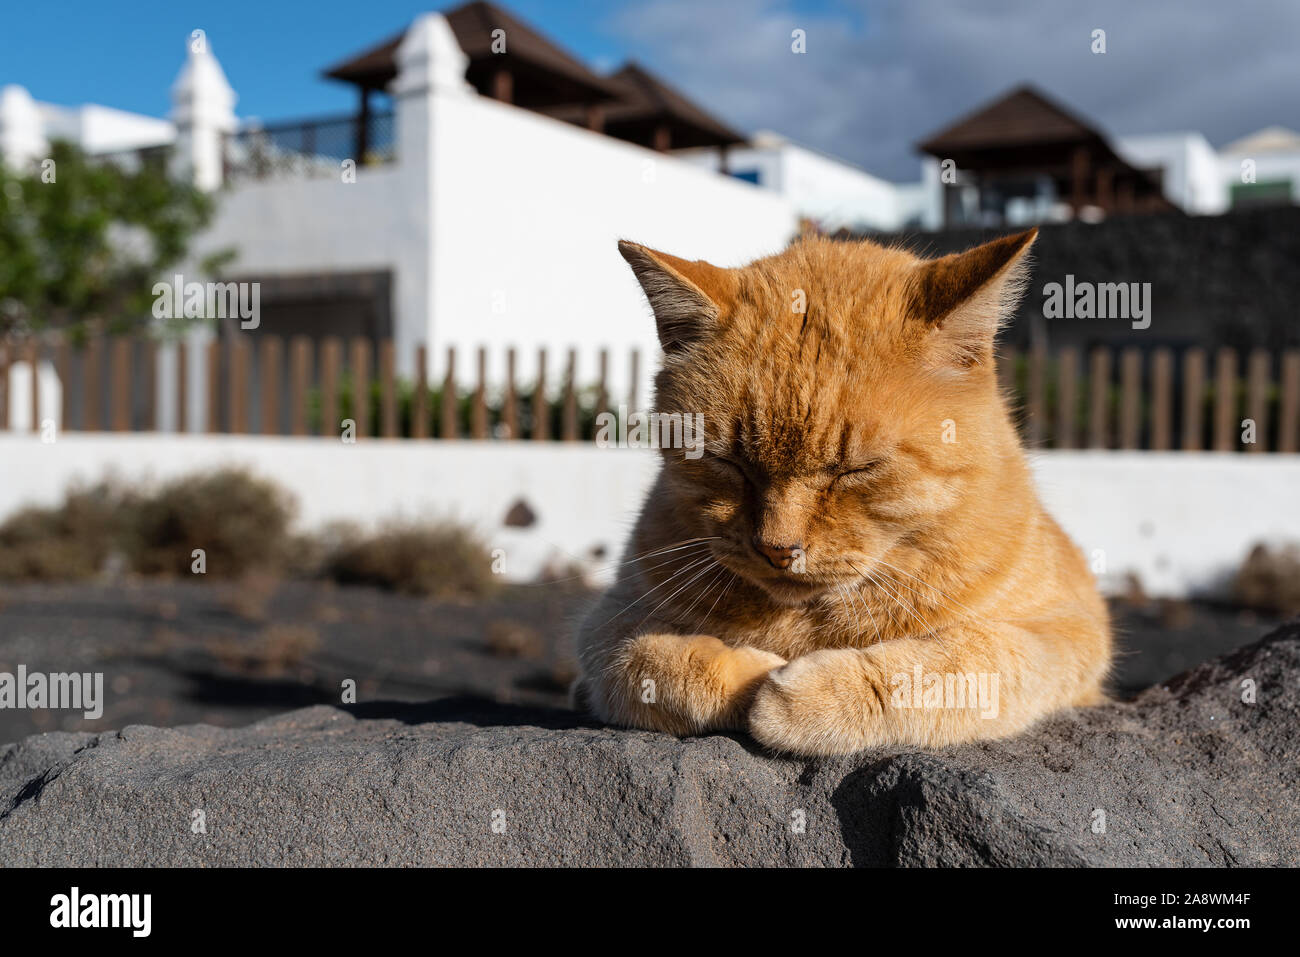 close-up front view of red cat sleeping on rough stone wall Stock Photo